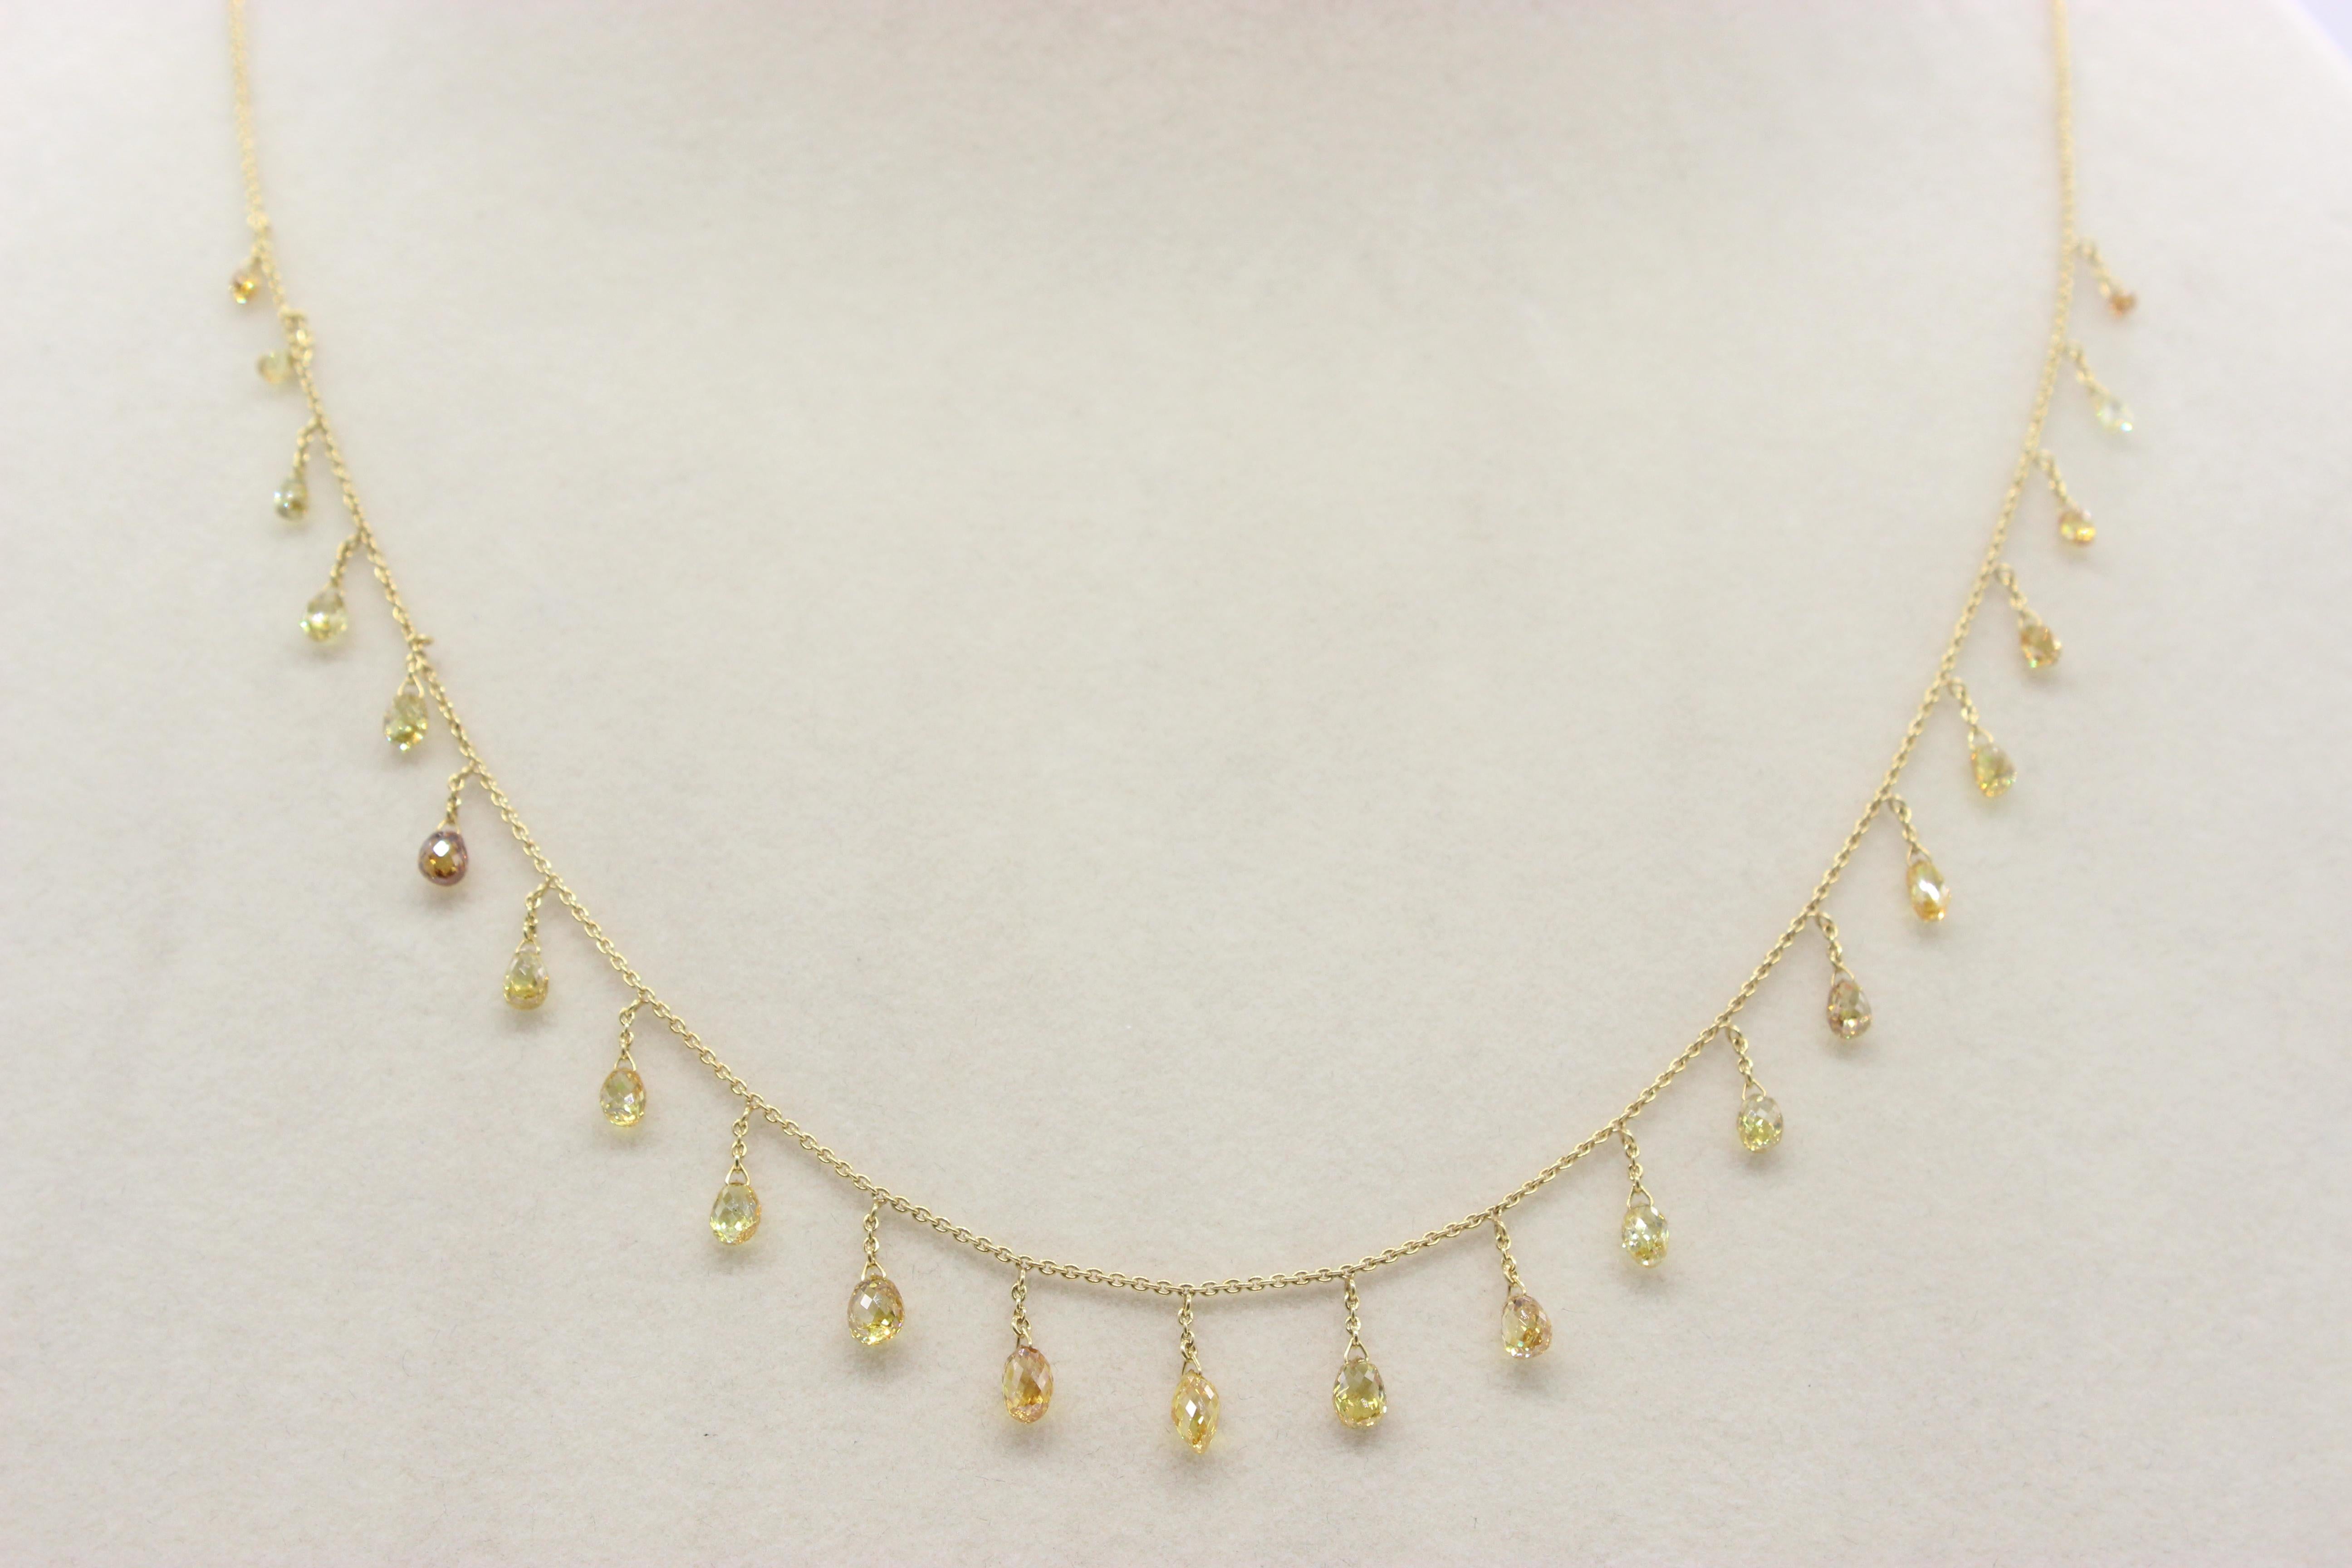 PANIM 5.30 Carat Fancy Color Diamond Briolette 18 Karat Yellow Gold Necklace In New Condition For Sale In Tsim Sha Tsui, Hong Kong